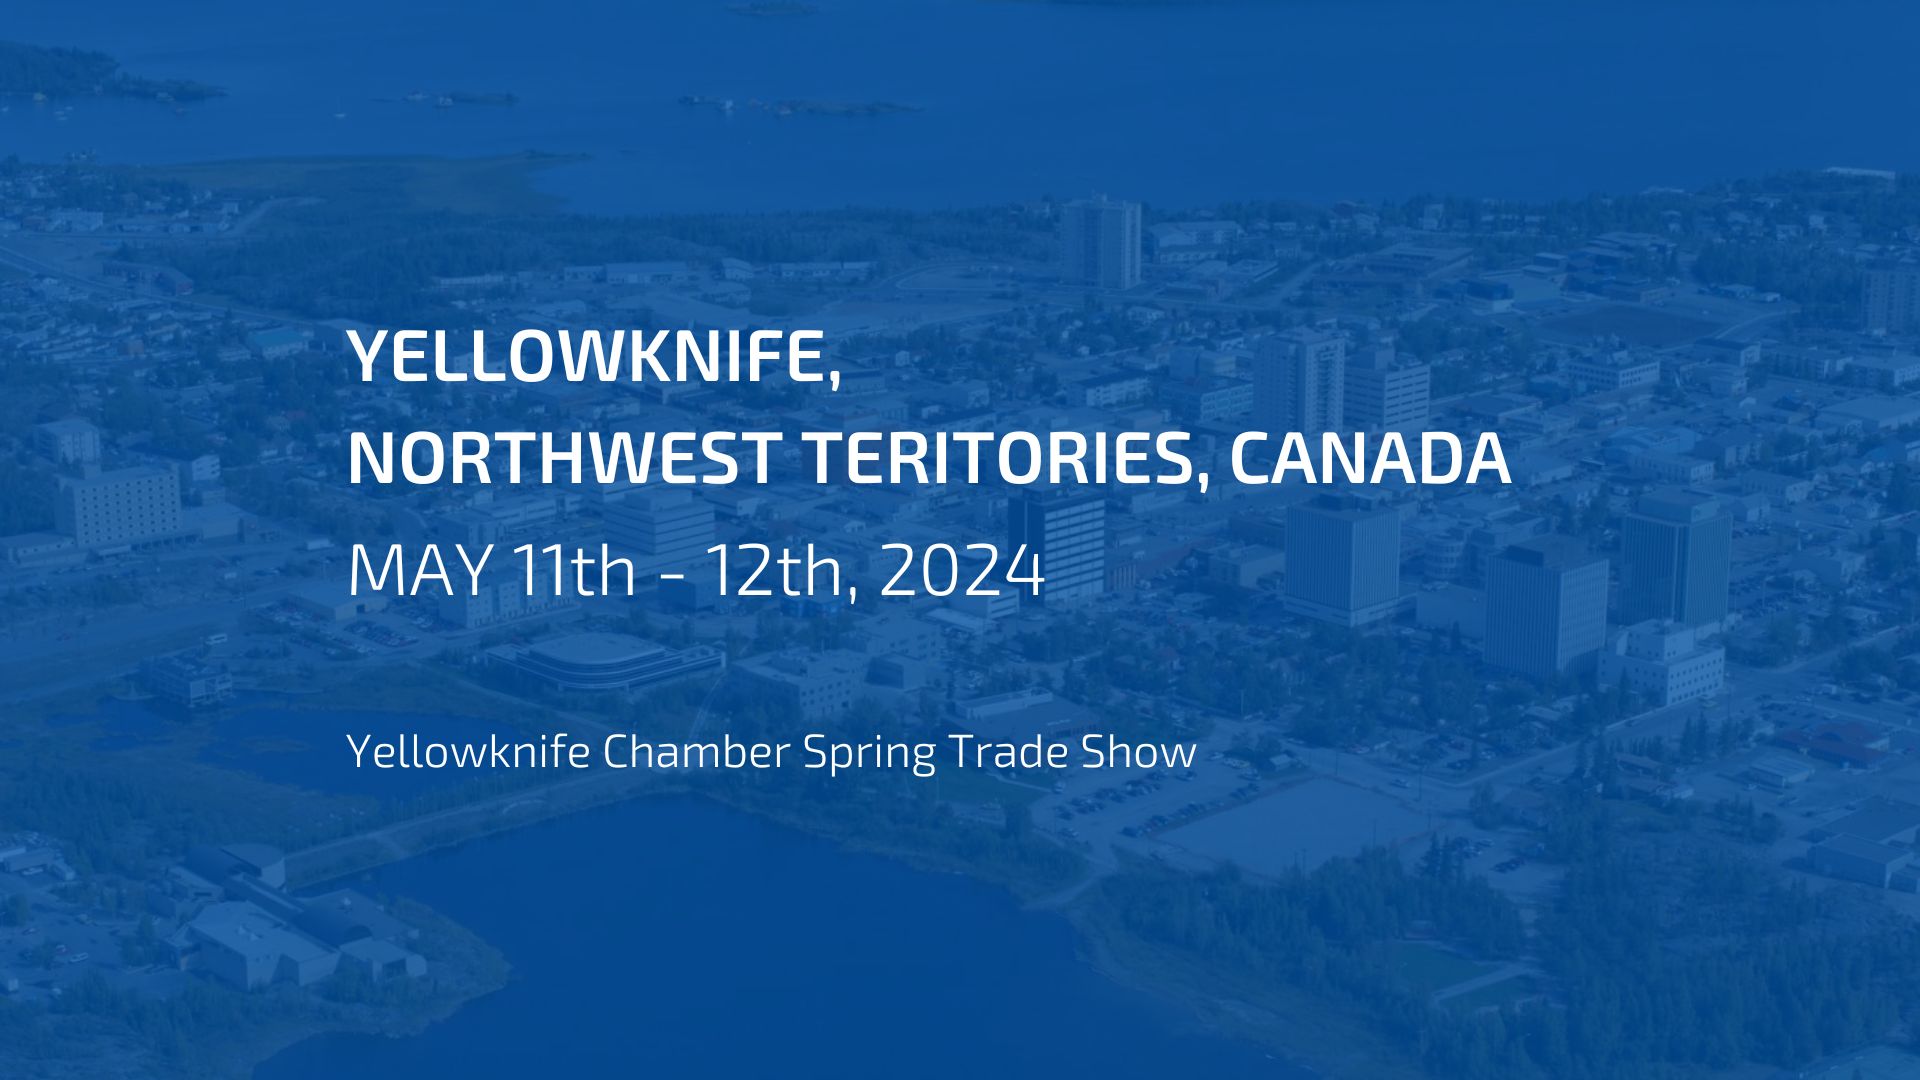 Visit our booth at the Yellowknife Chamber Spring Trade Show from May 11th to 12th